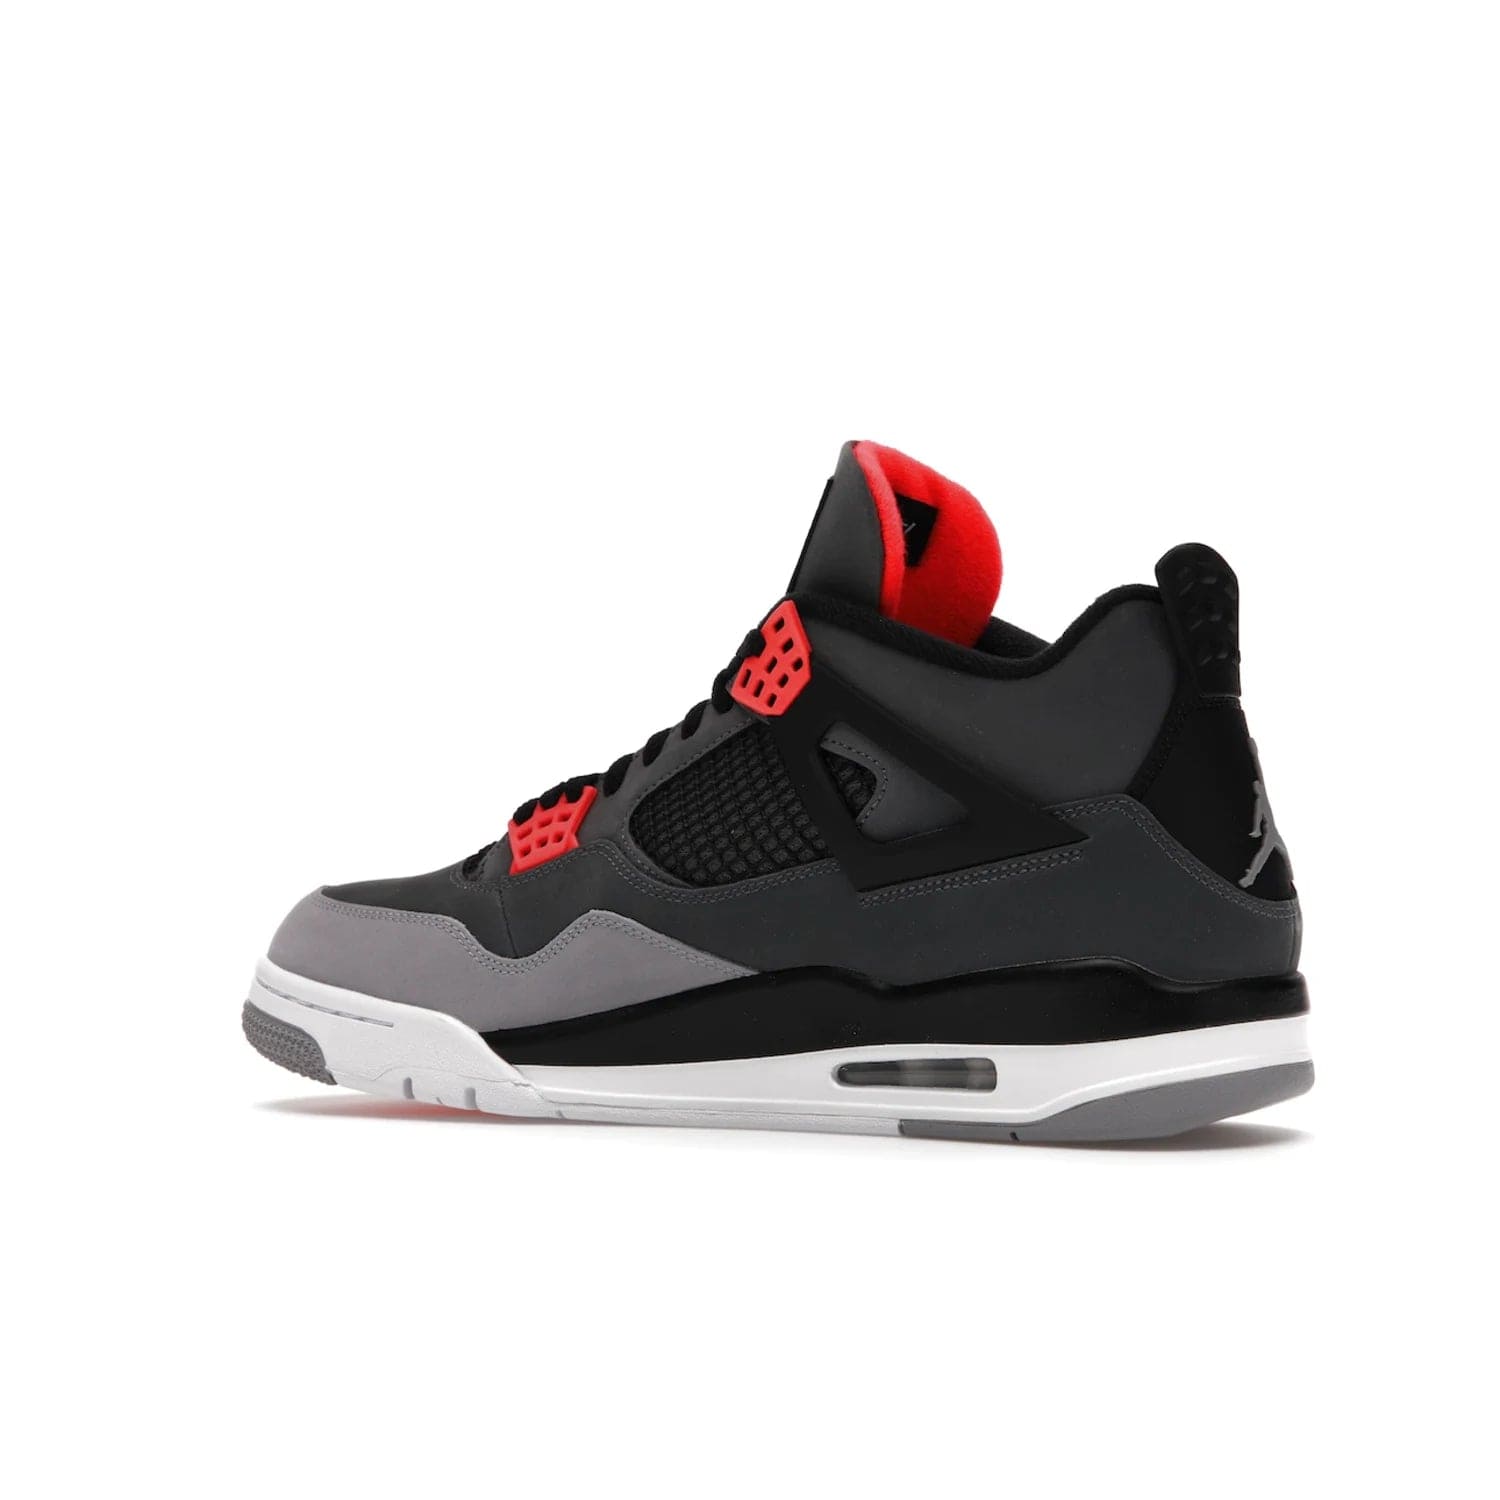 Jordan 4 Retro Infrared - Image 22 - Only at www.BallersClubKickz.com - Introducing the classic & timeless Air Jordan 4 Infrared. Durabuck upper, TPU mesh inserts, tech straps & heel tabs in dark grey and infrared accents. White sole with visible Air units. Out June 15, 2022. Get your pair now!